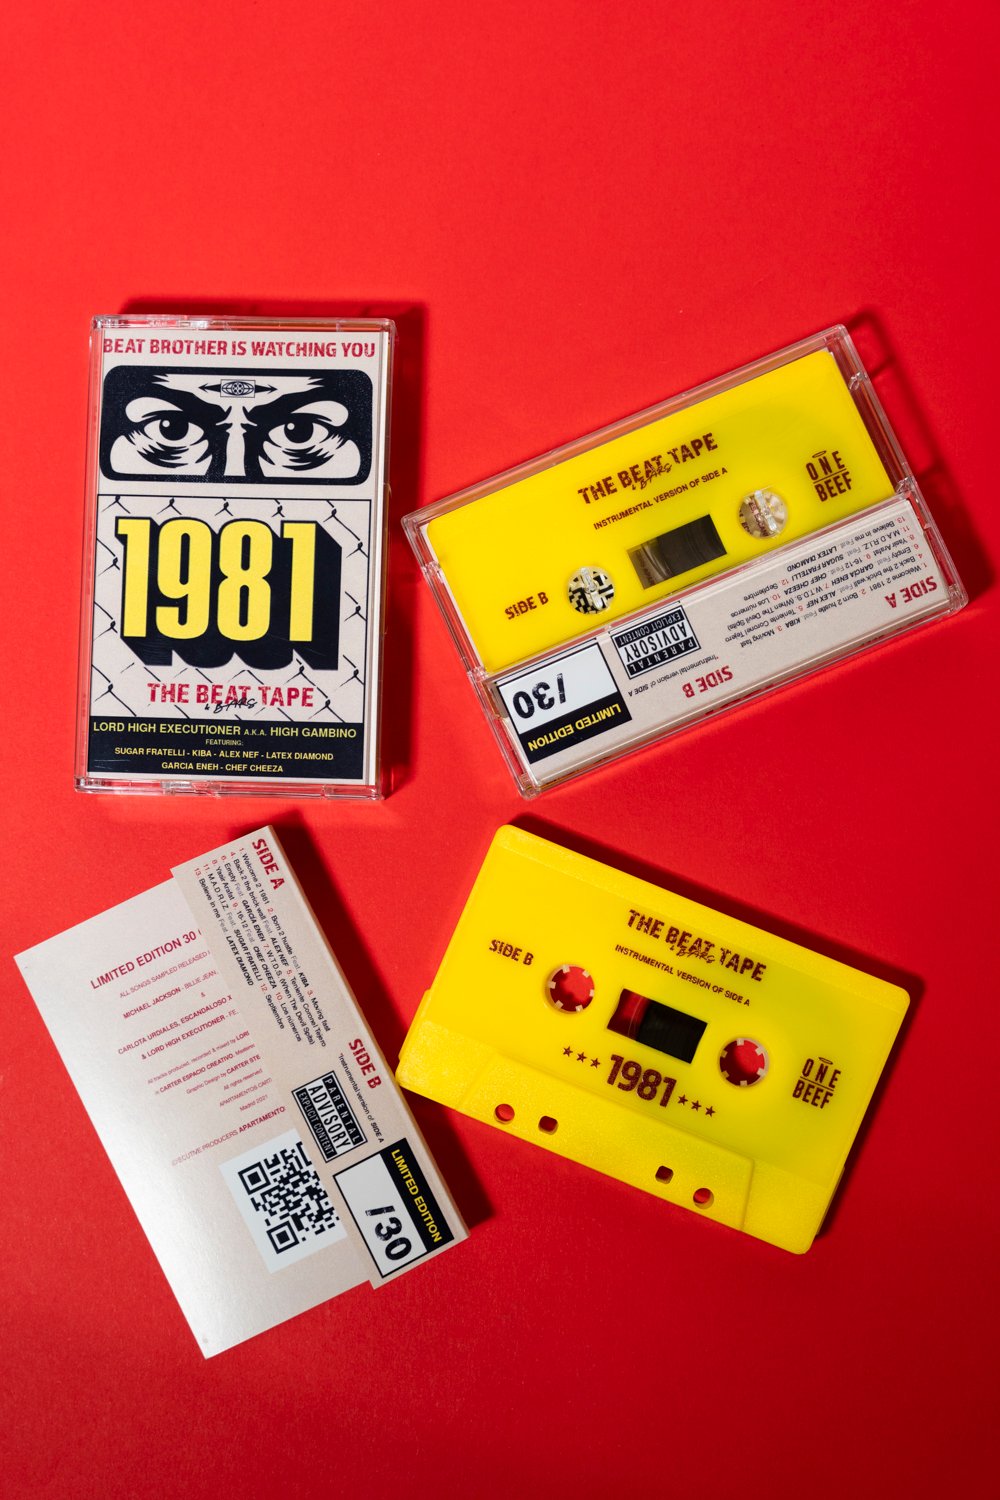 Image of "1981"  The beat tape By: LORD HIGH EXECUTIONER a.k.a HIGH GAMBINO.